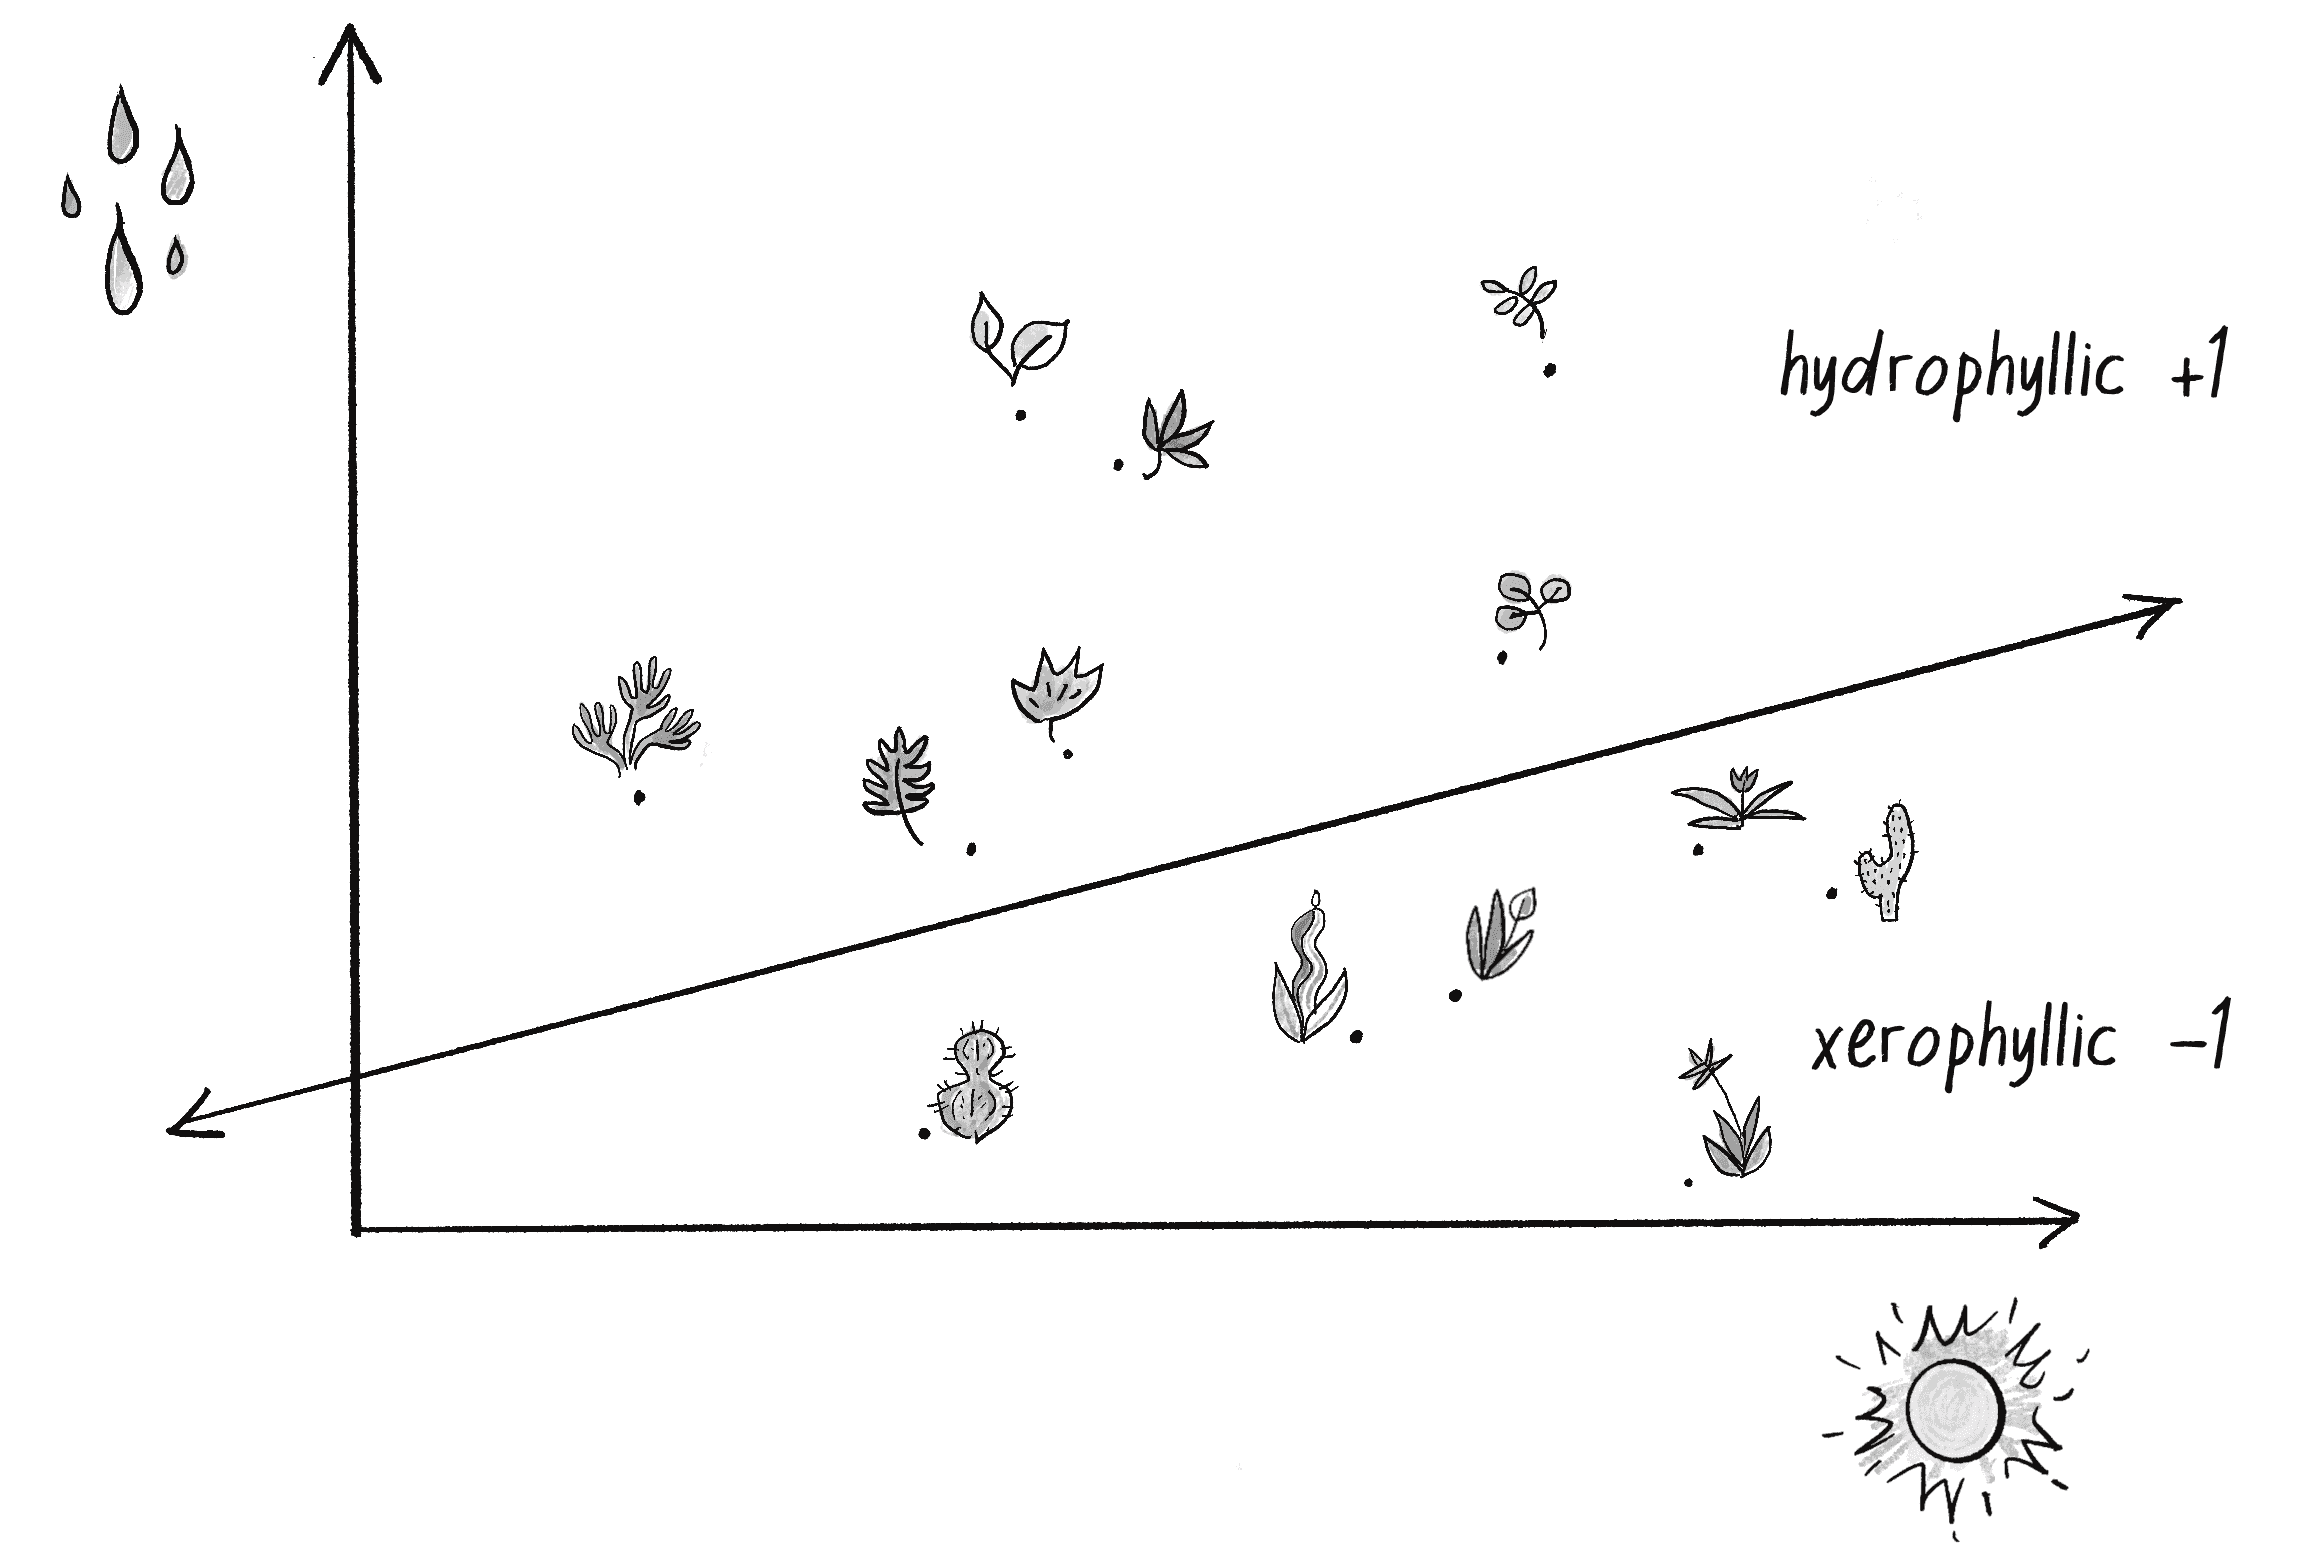 Figure 10.4: A collection of points in 2D space divided by a line, representing plant categories according to their water and sunlight intake 